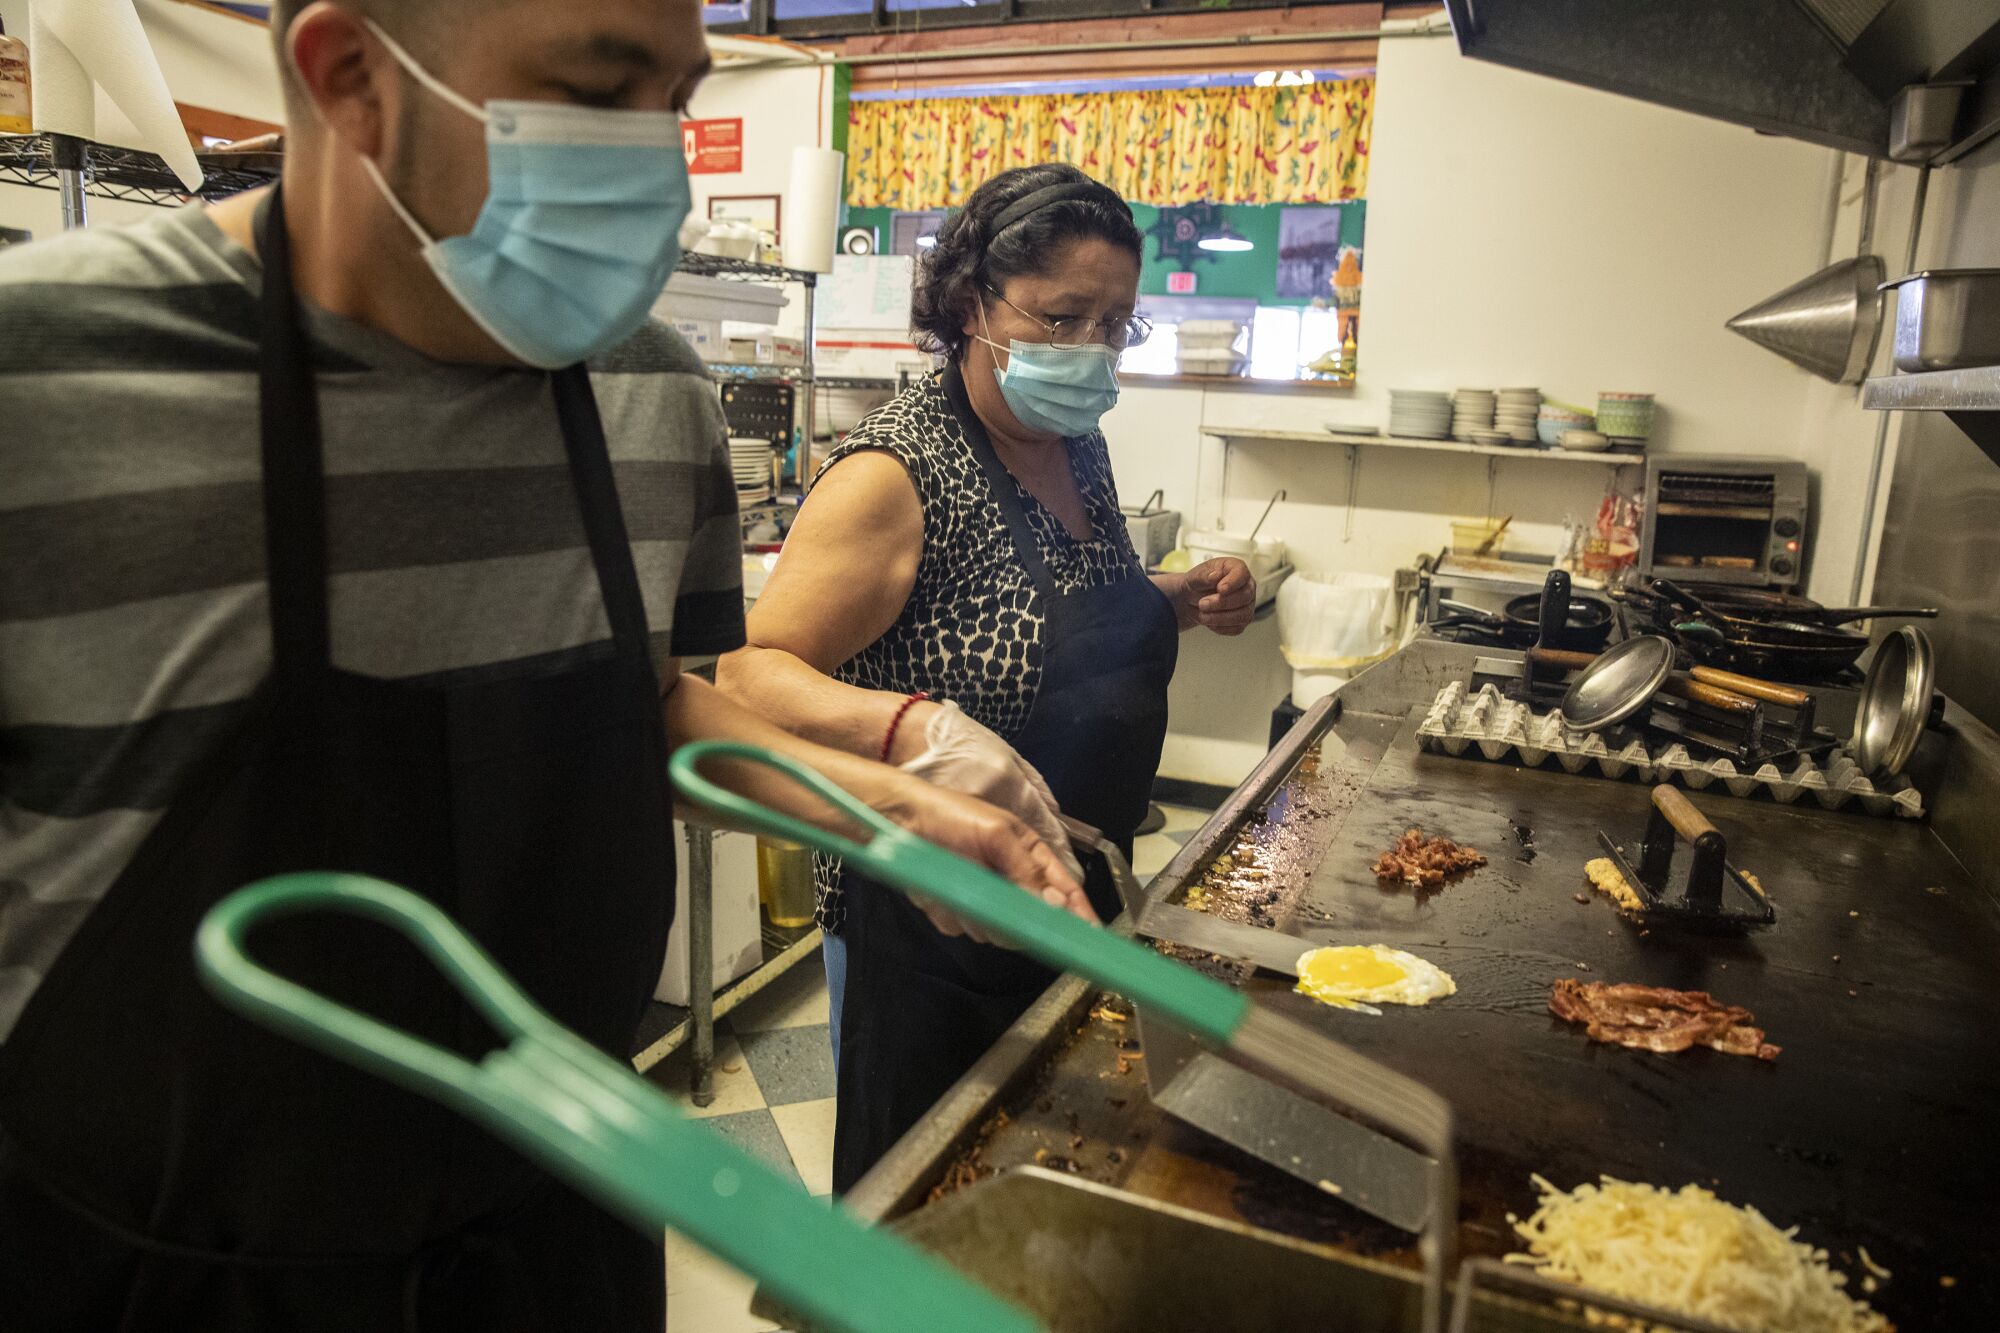 Line cook Jesus Rodriguez, left, prepares meals with Francisca, right, a chef at a local cafe in Bisbee.